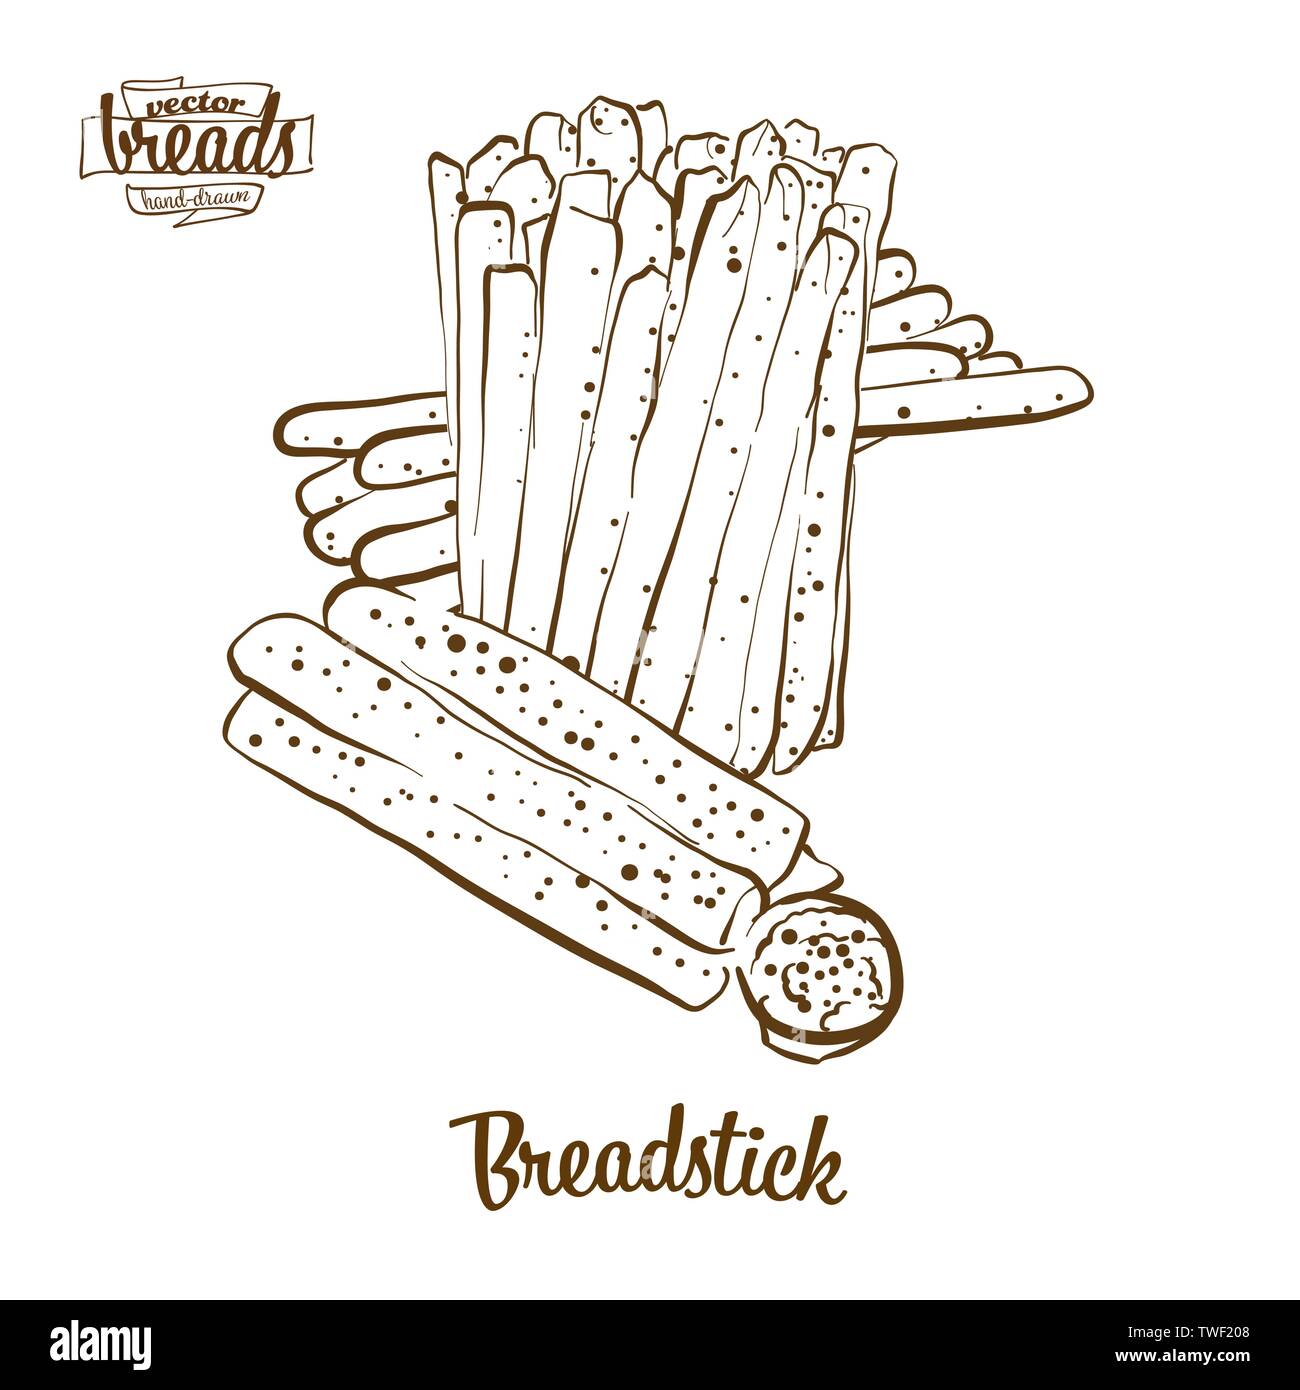 Breadstick bread vector drawing. Food sketch of Dry bread, usually known in Italy. Bakery illustration series. Stock Vector